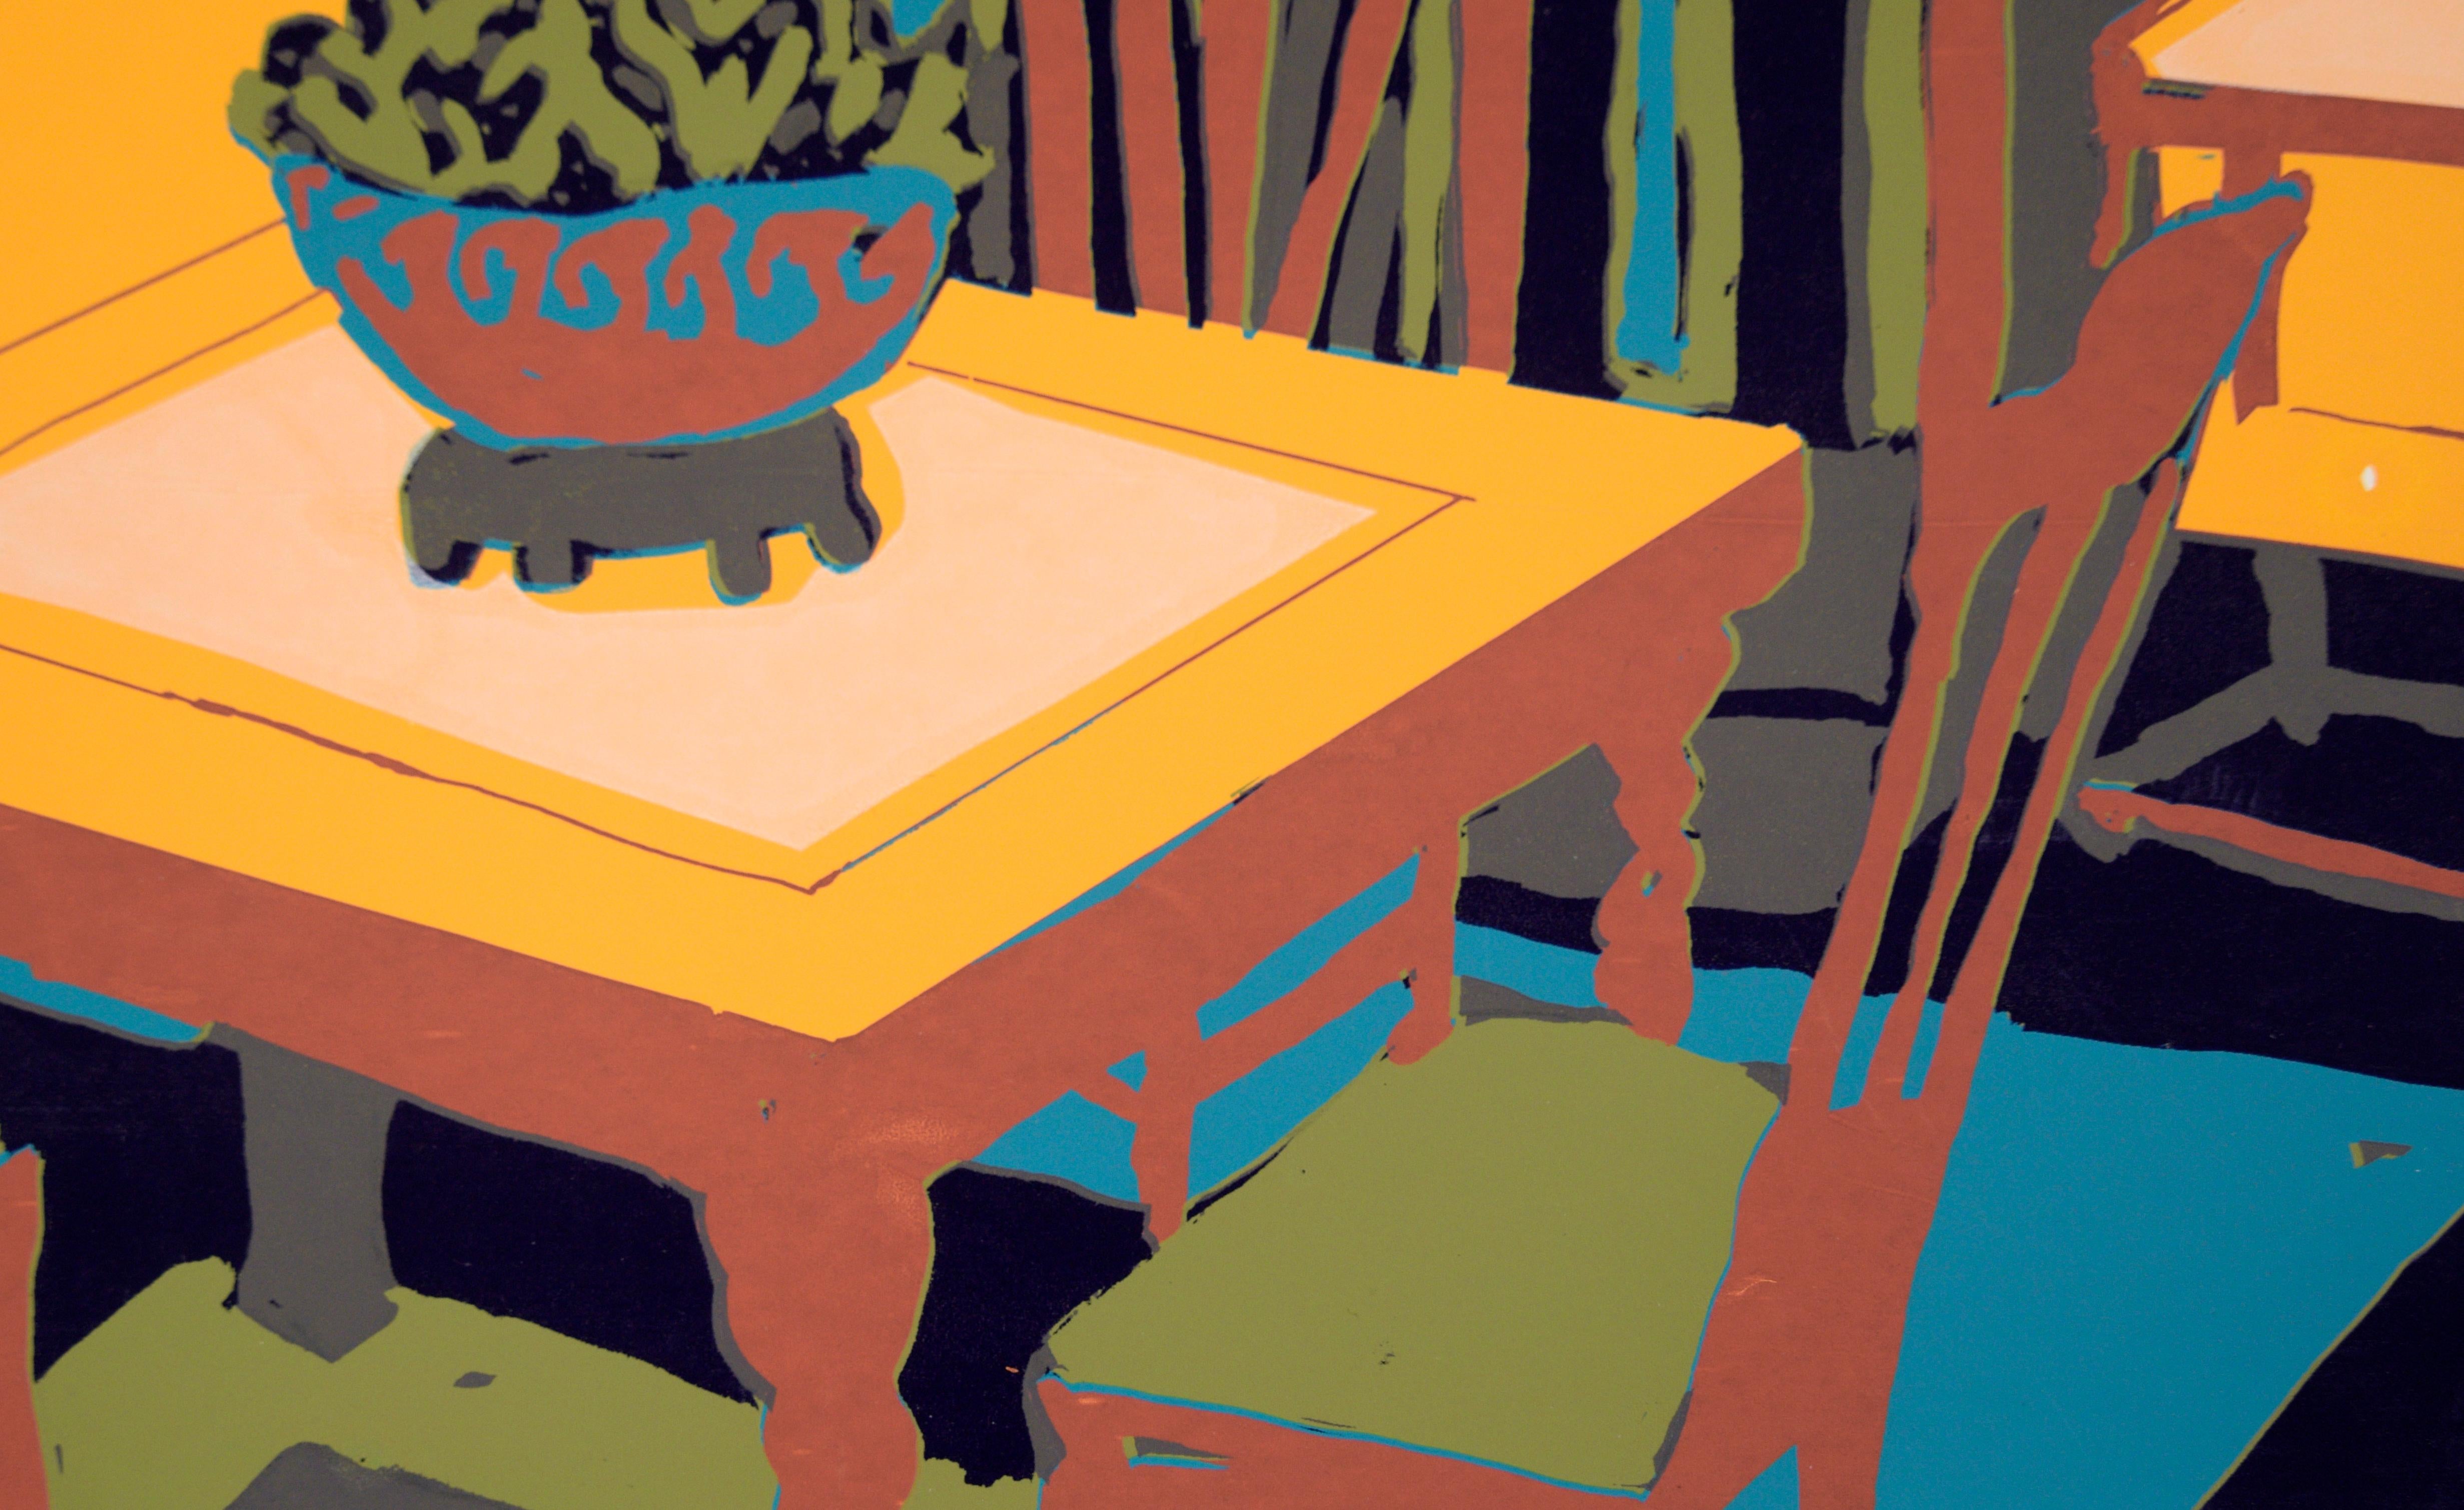 Yellow Dining Room Interior - Multi Layer Fauvist Screenprint on Archival Paper - Abstract Impressionist Print by Doris Warner